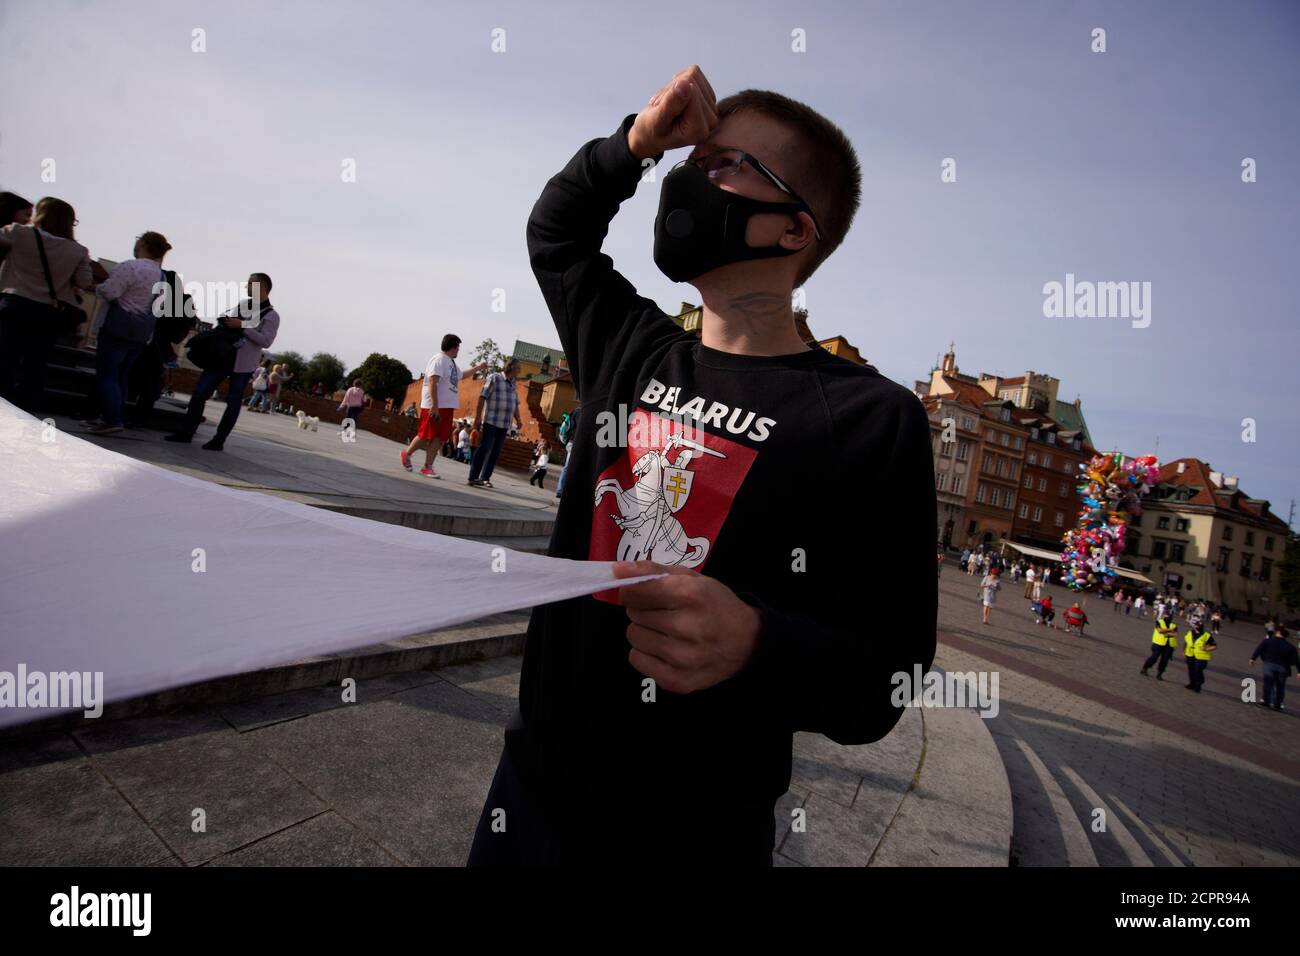 A man with a Pogon symbol on his sweater holds a large, Belarusian White-Red-White flag in Warsaw, Poland on September 19, 2020. Several dozen people, Stock Photo